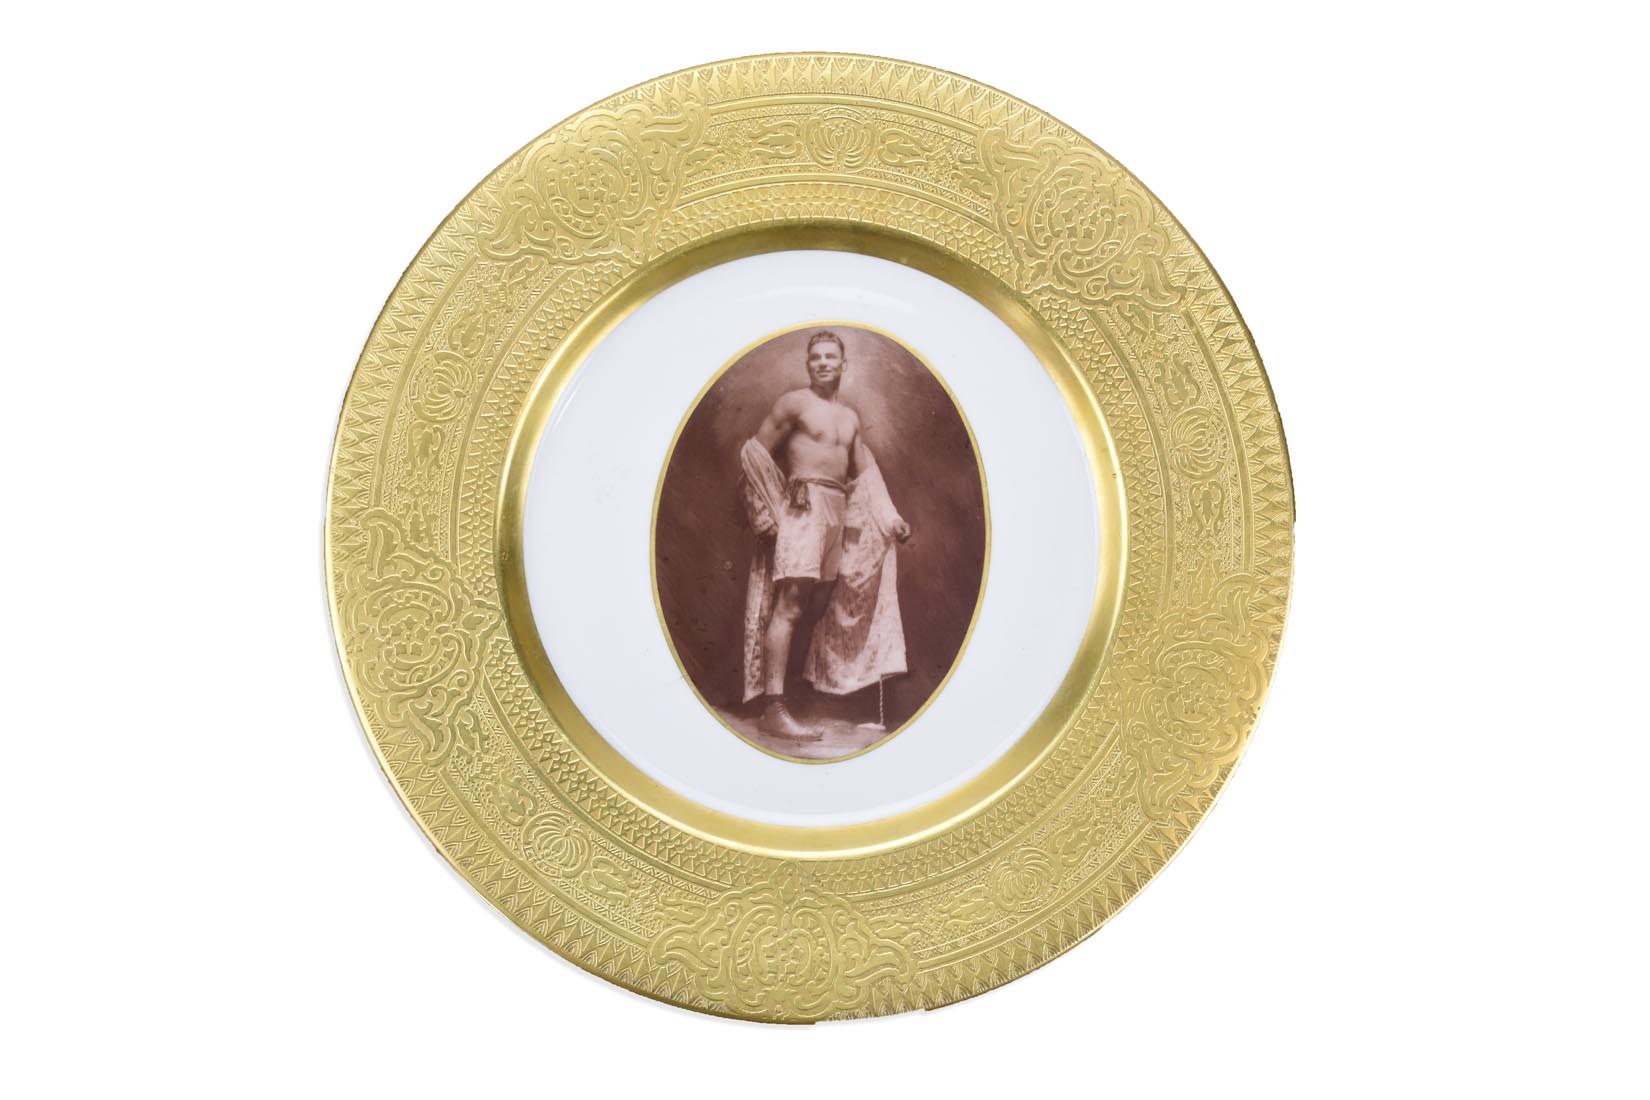 Muhammad Ali & Boxing - Jack Dempsey Gold Plated Photo China Dinner Plate